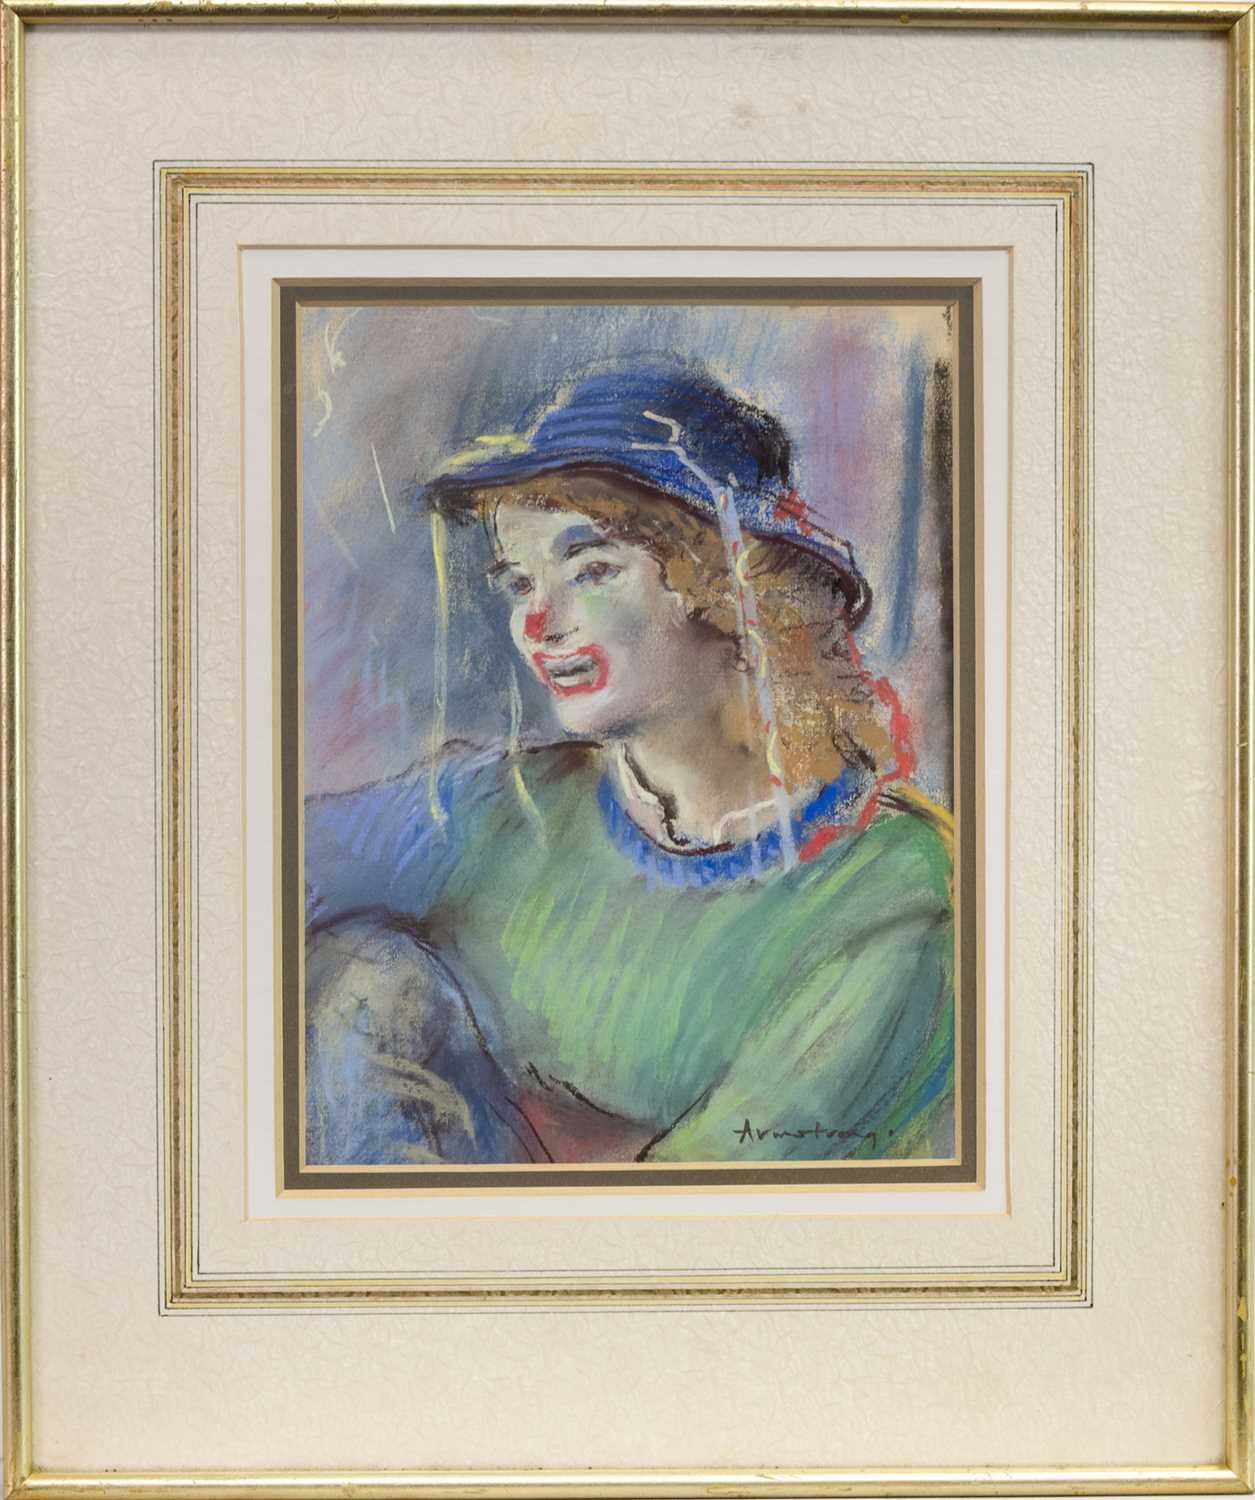 Lot 512 - GLASGOW STREET ENTERTAINER, A PASTEL BY ANTHONY ARMSTRONG